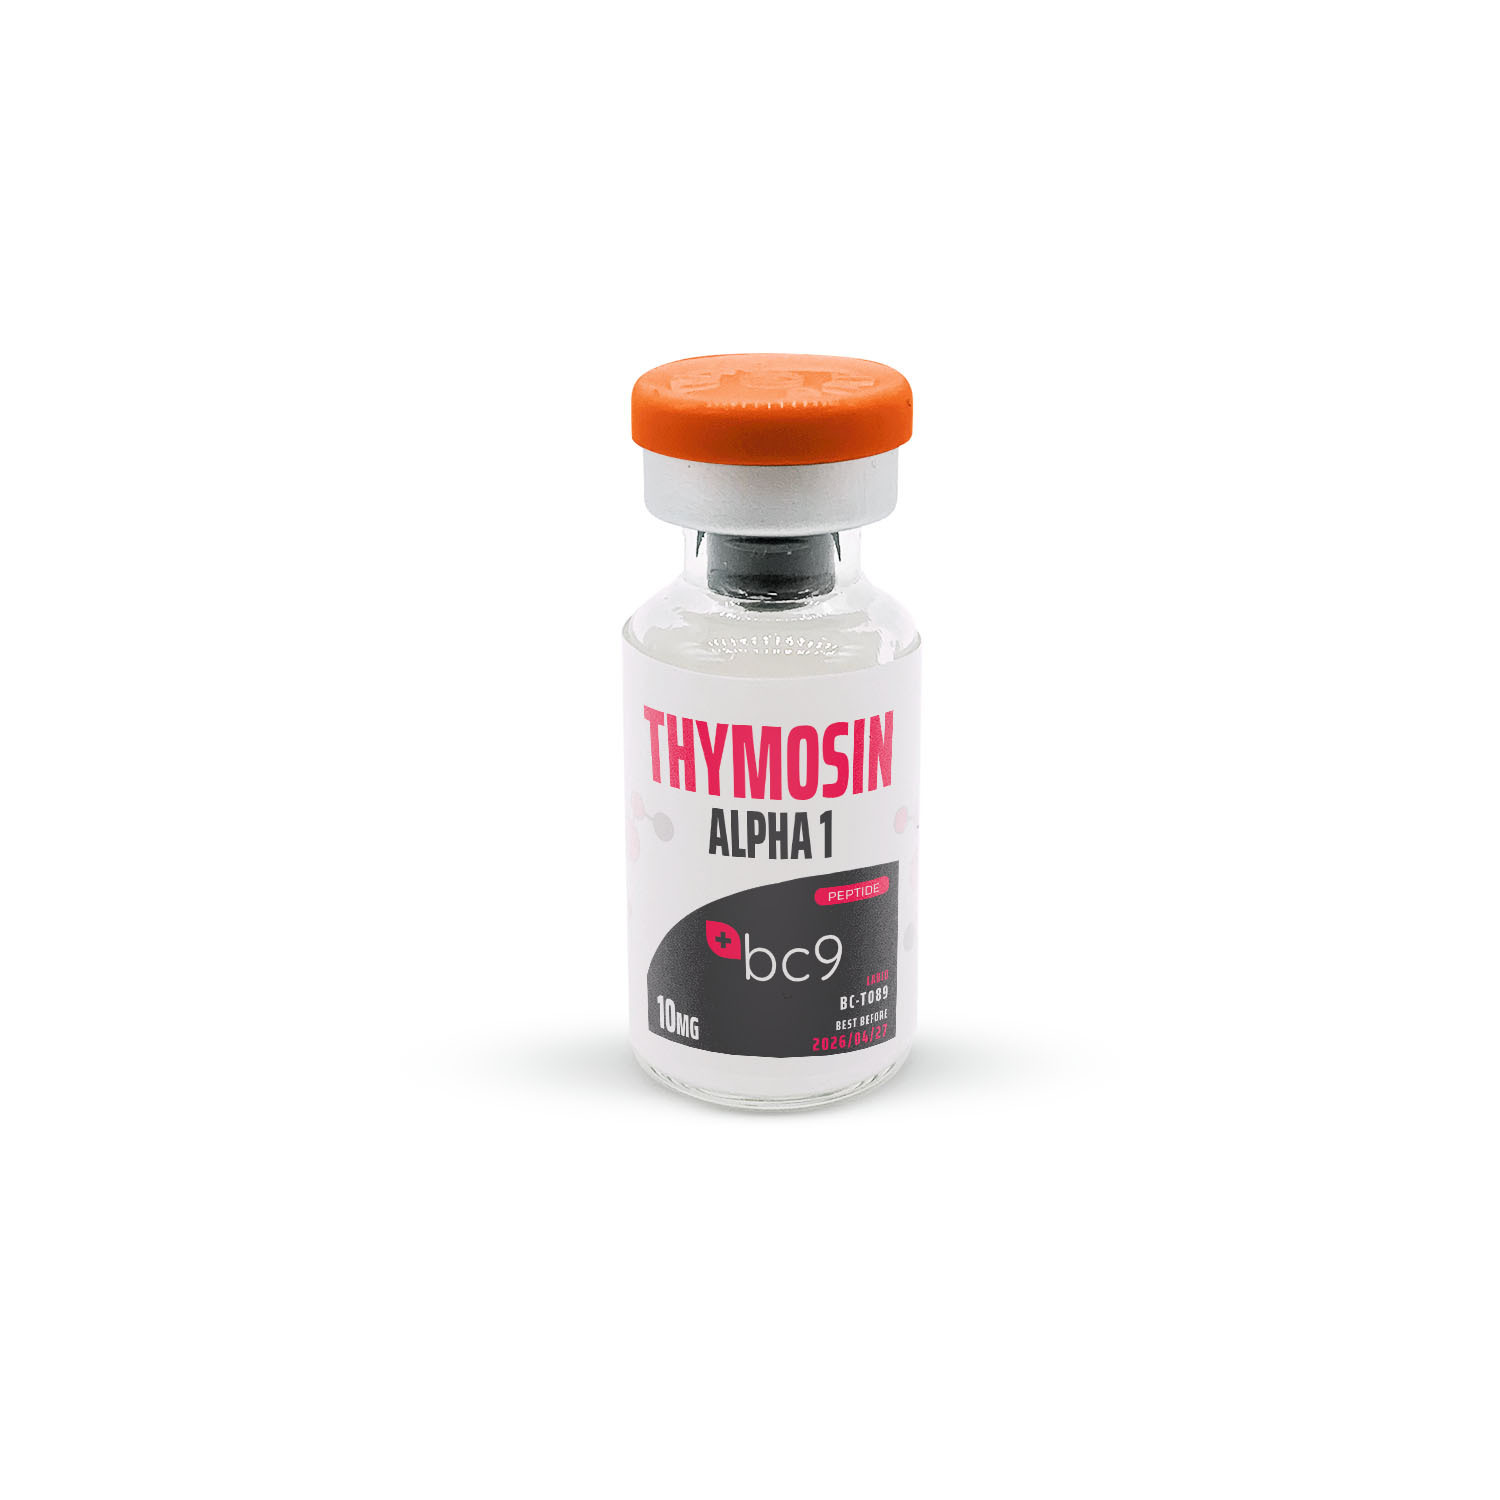 Thymosin Alpha 1 Peptide For Sale | 3rd Party Tested | BC9.org